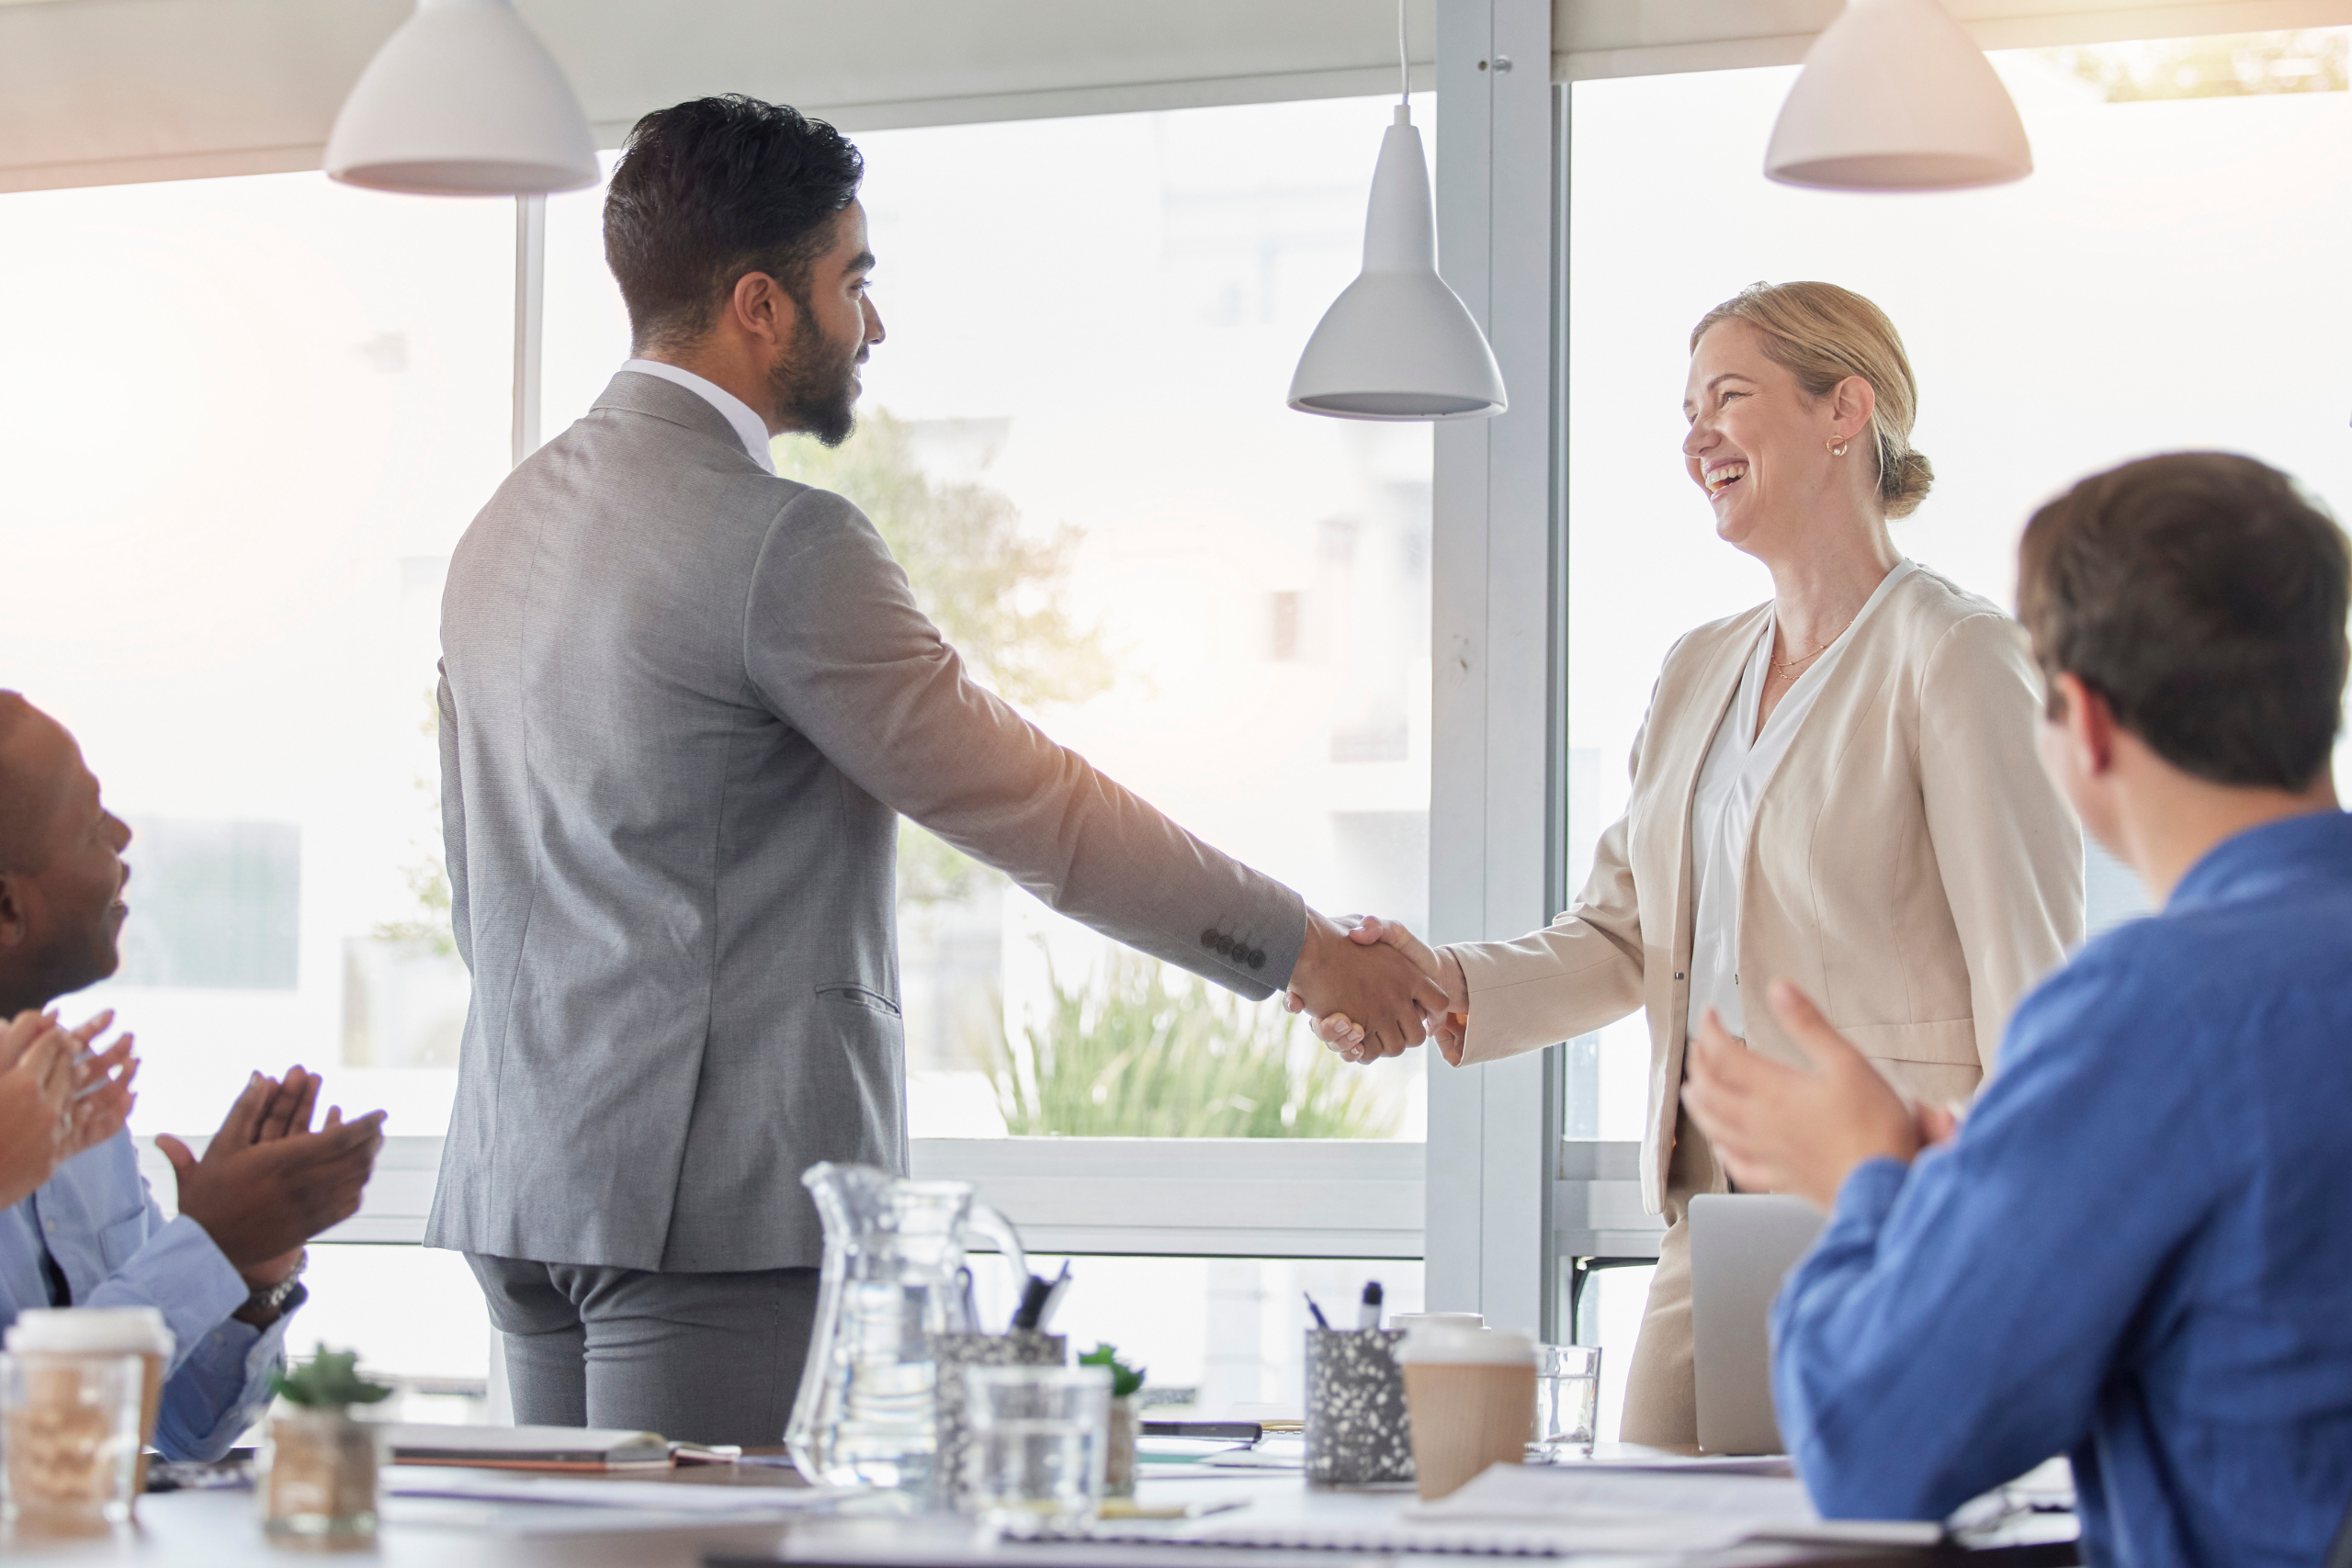 Man and woman in business meeting shaking hands